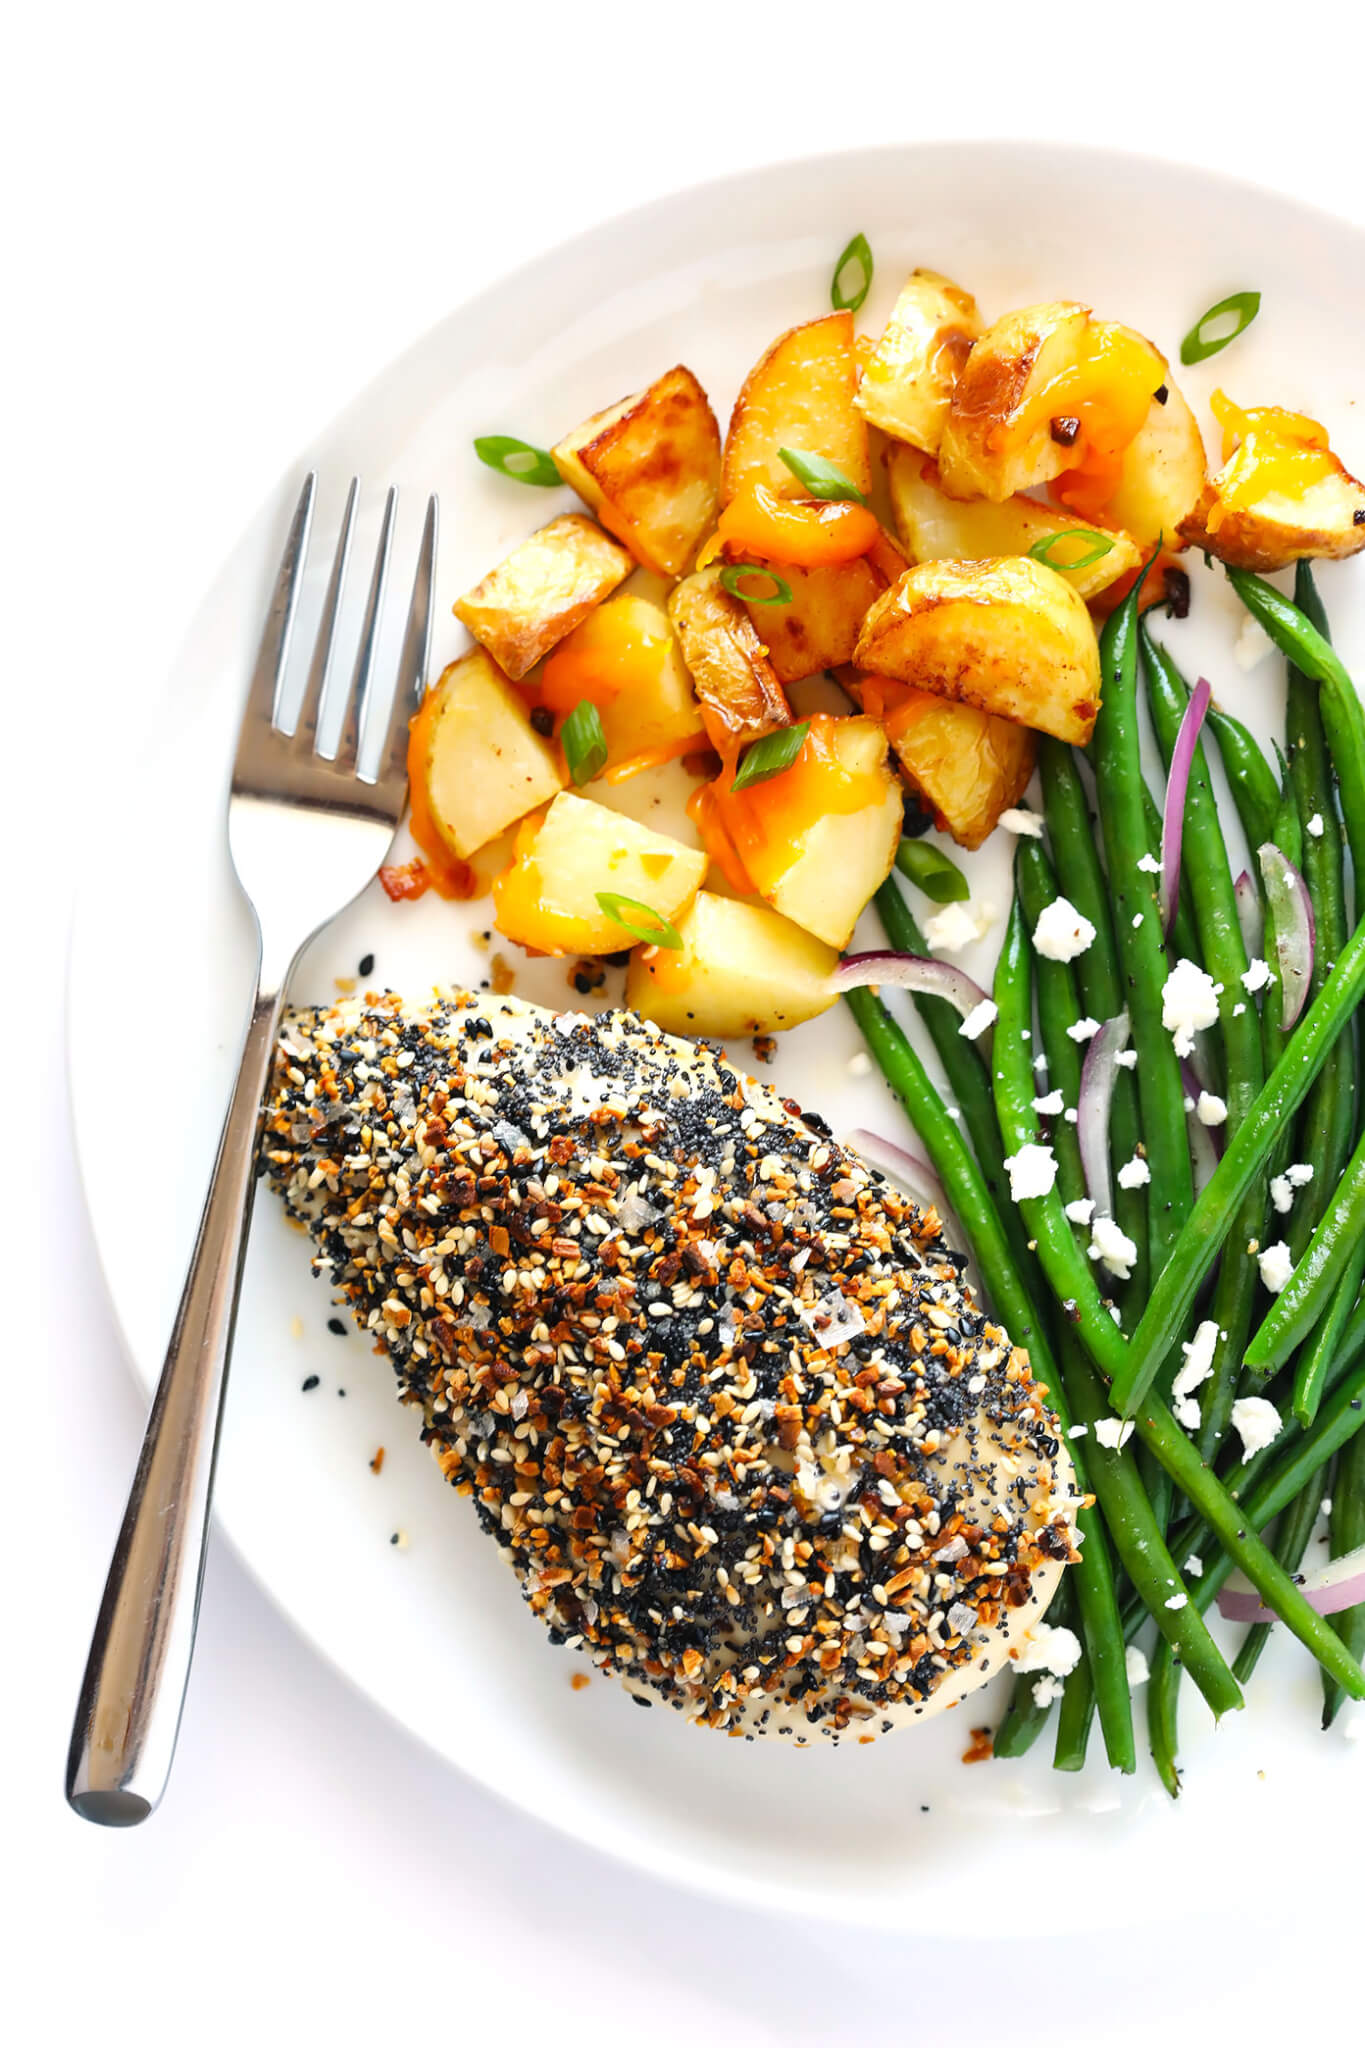 This "Everything" Chicken recipe is made with yummy everything bagel seasoning, and baked in the oven to juicy, tender, delicious perfection. It's an easy and gluten-free dinner idea that everyone will love, especially with those garlic, poppyseed, sesame flavors! | gimmesomeoven.com